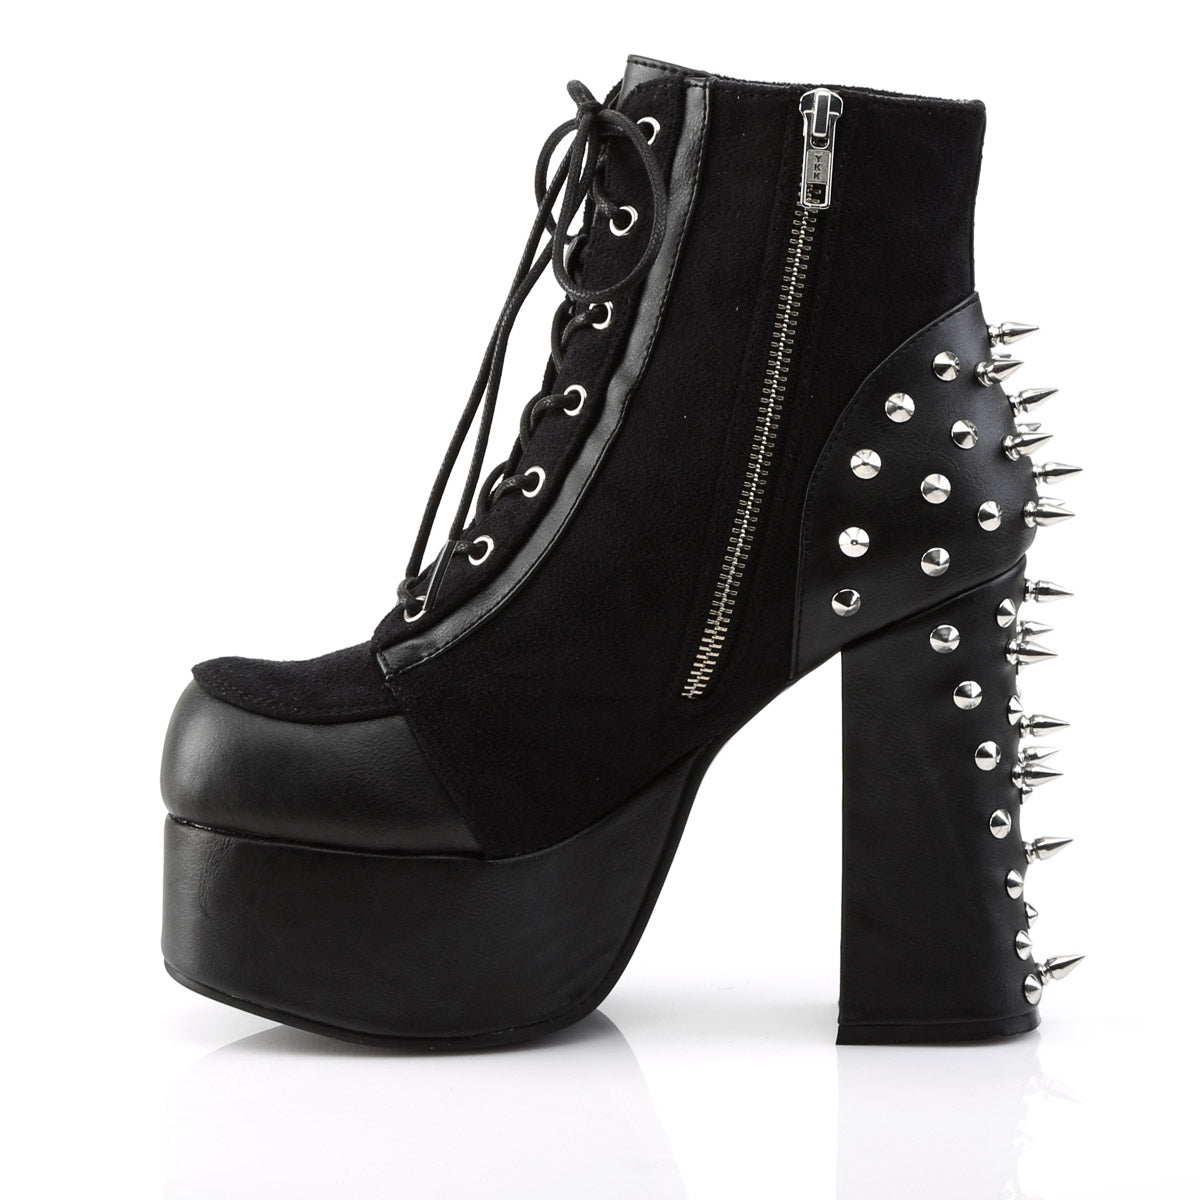 4 1/2" Heel, 2" PF Lace-Up Front Ankle Boot w/ Studs Blk Vegan Leather-Suede Pleaser Demonia CHARADE/100